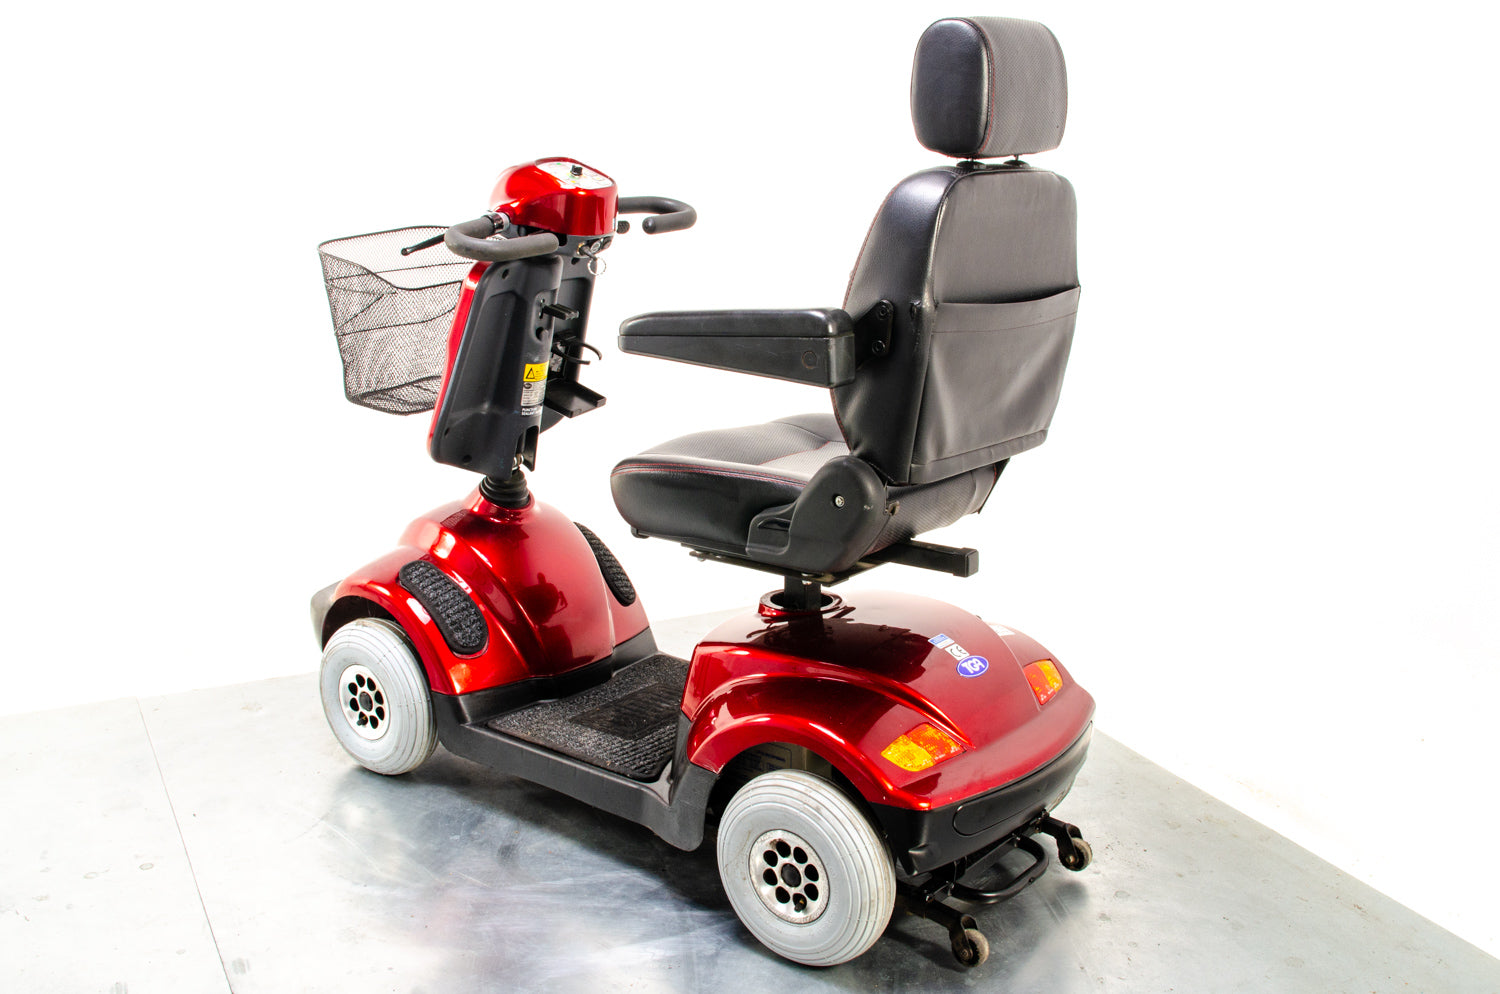 TGA Sonet Used Mobility Scooter 6mph Road Pavement 25 Stone Comfy Red 13338